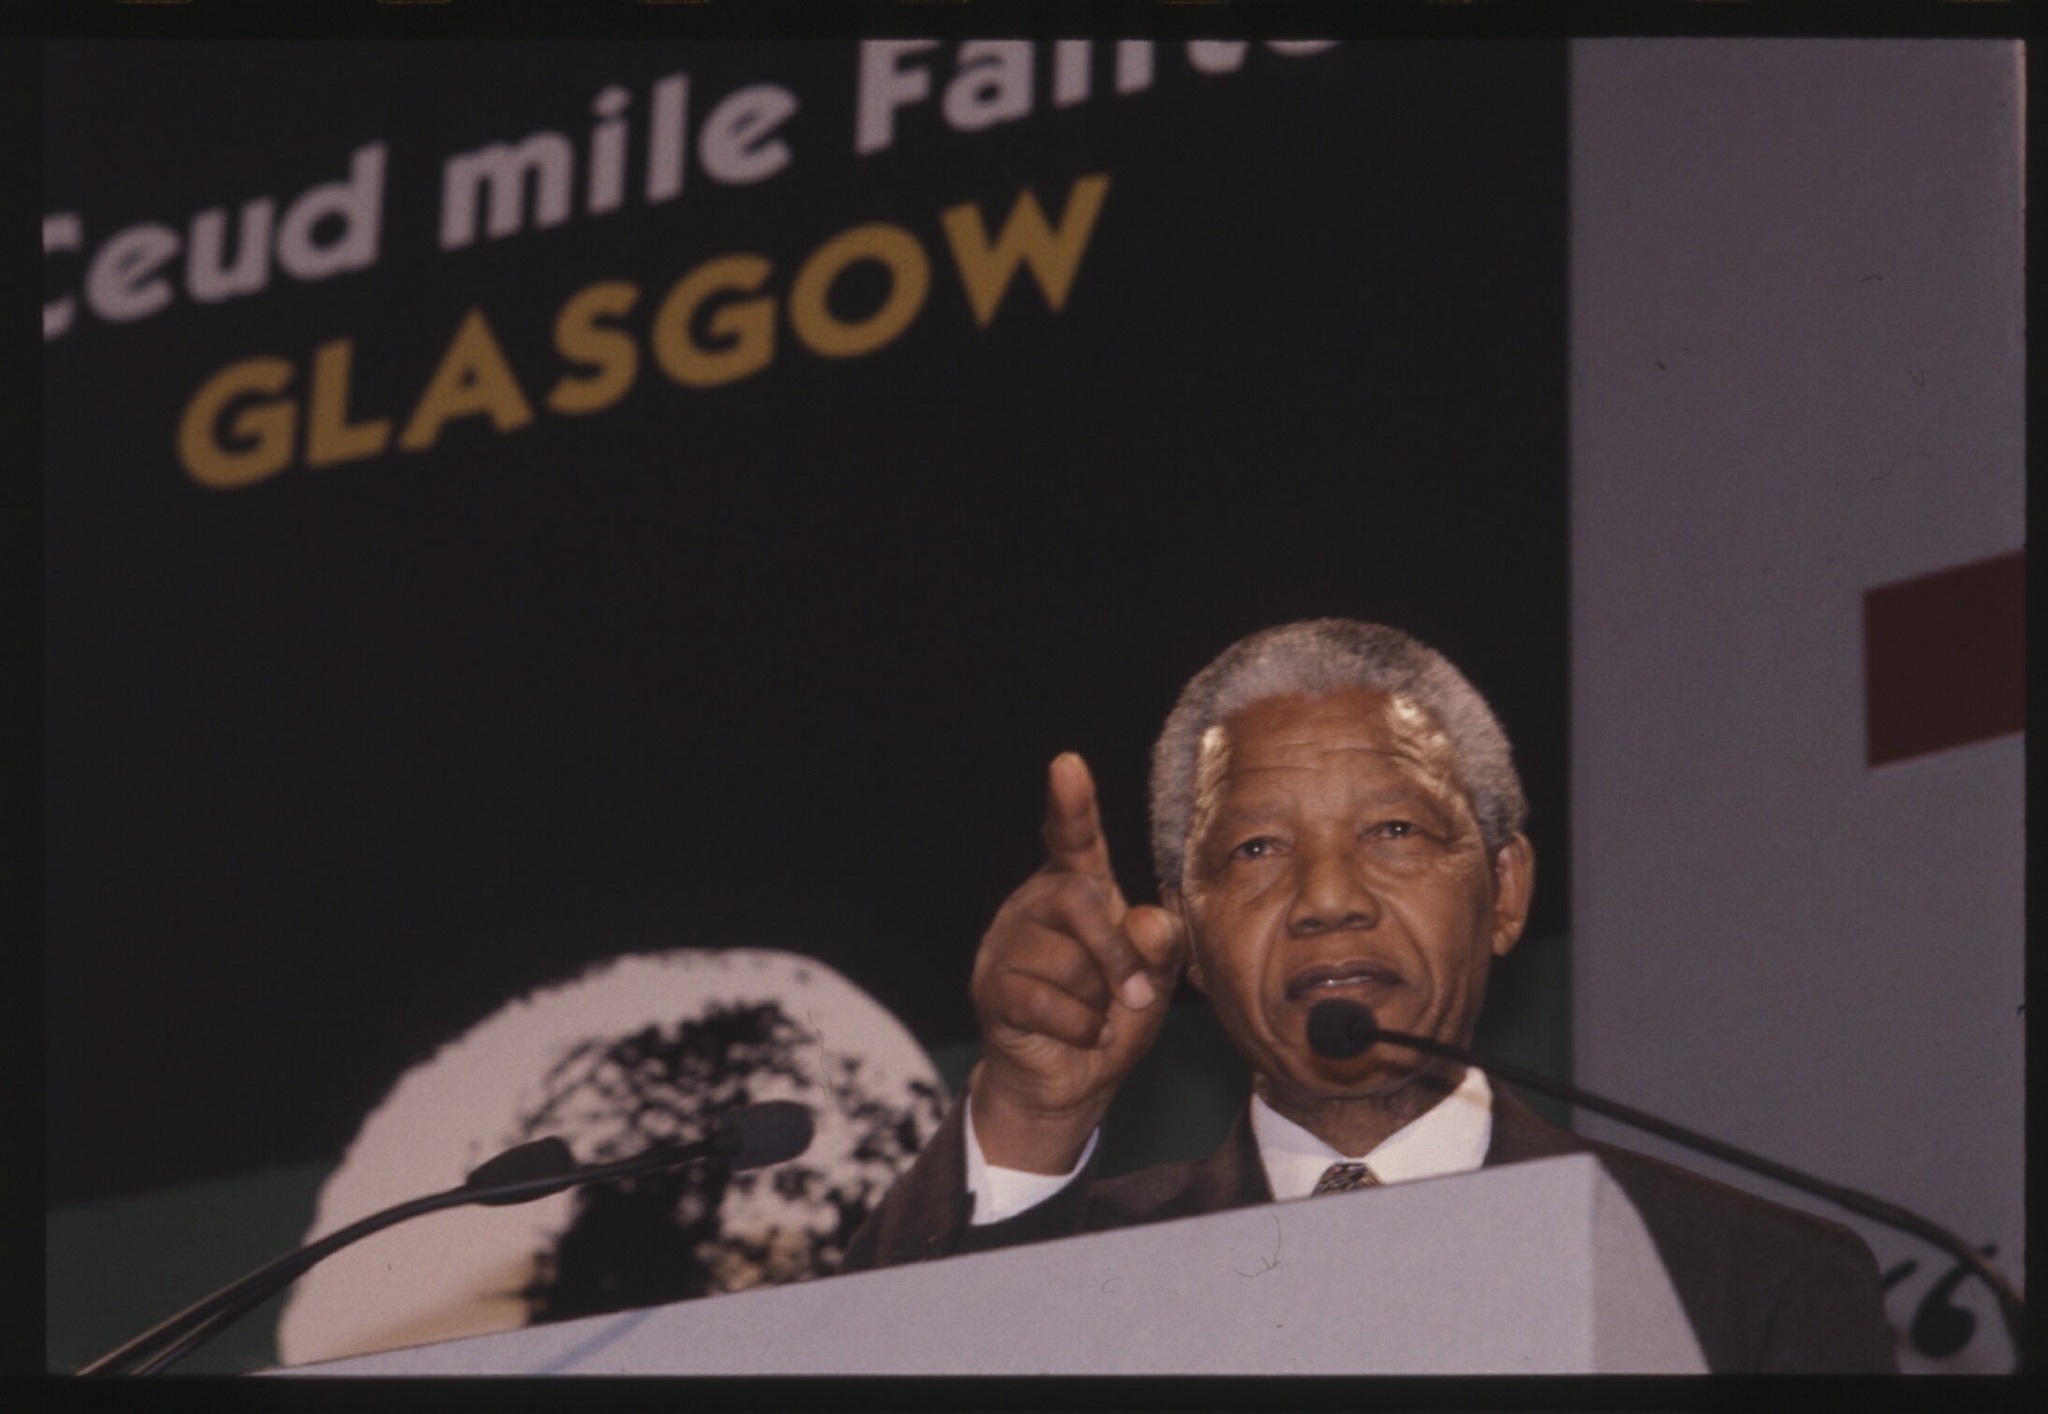 Nelson Mandela arrived in Glasgow in 1993 to accept the Freedom of the City